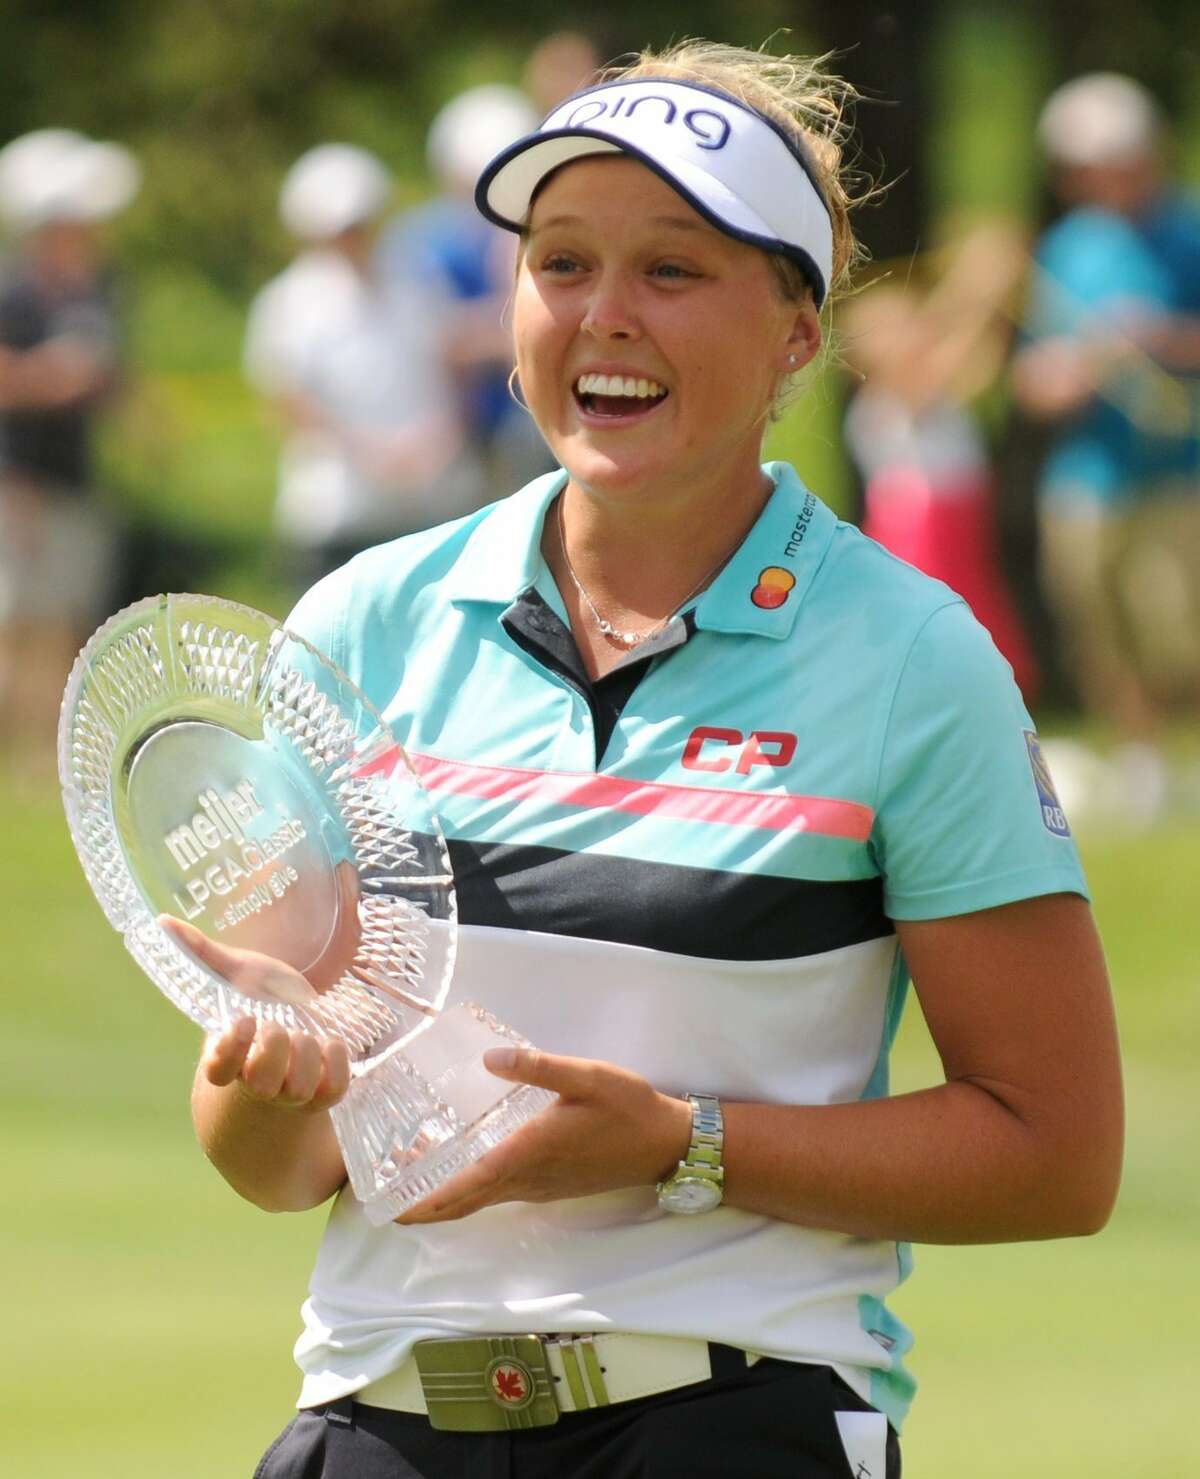 Brooke Henderson, of Canada, holds the trophy after winning the Meijer LPGA Classic golf tournament at Blythefield Country Club. Sunday, June 18, 2017, in Grand Rapids, Mich.. (Cory Olsen/The Grand Rapids Press via AP)